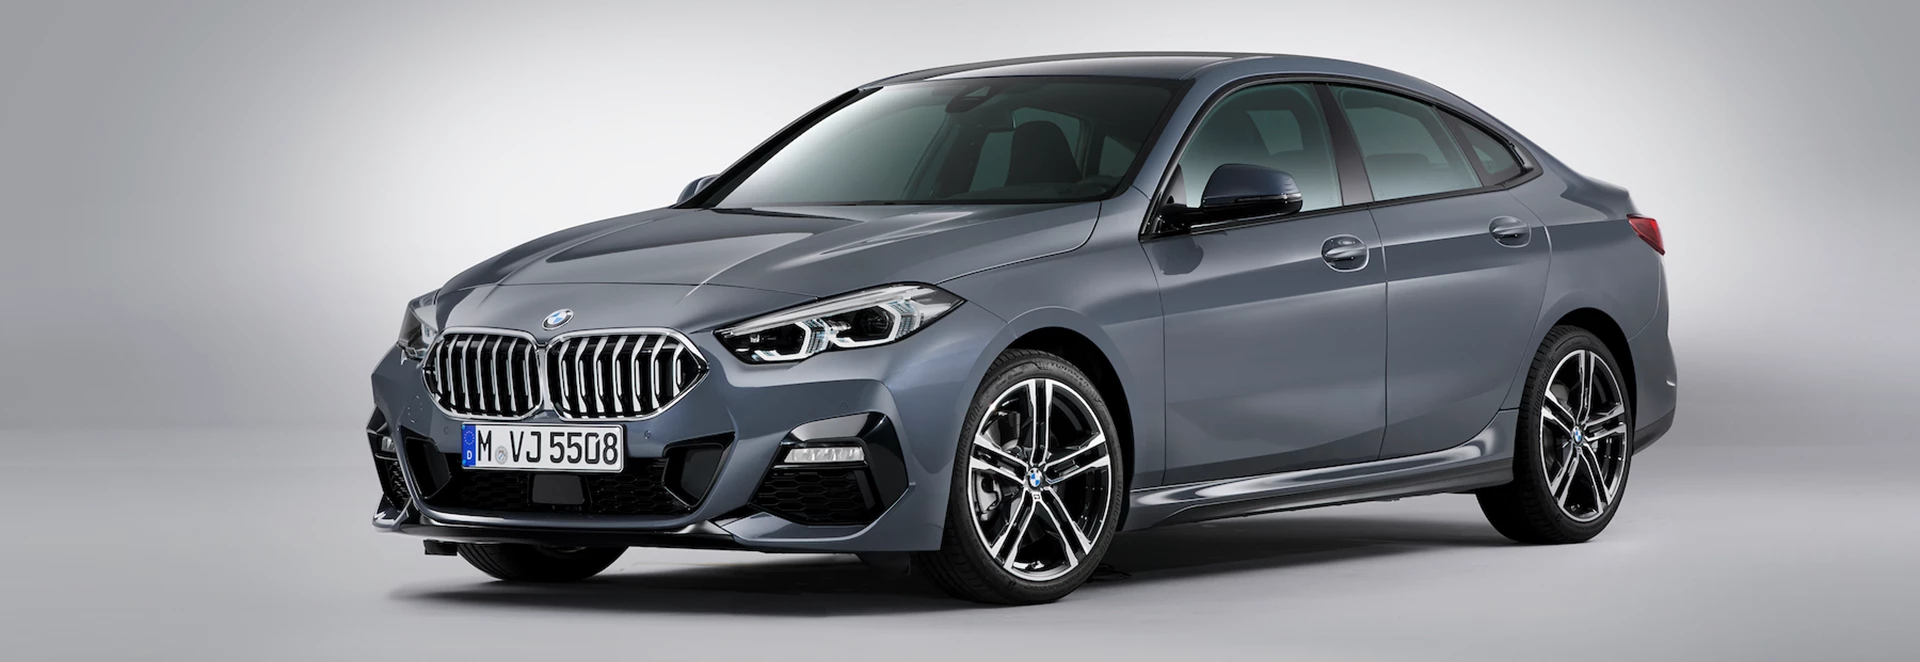 5 cool features on the new BMW 2 Series Gran Coupe